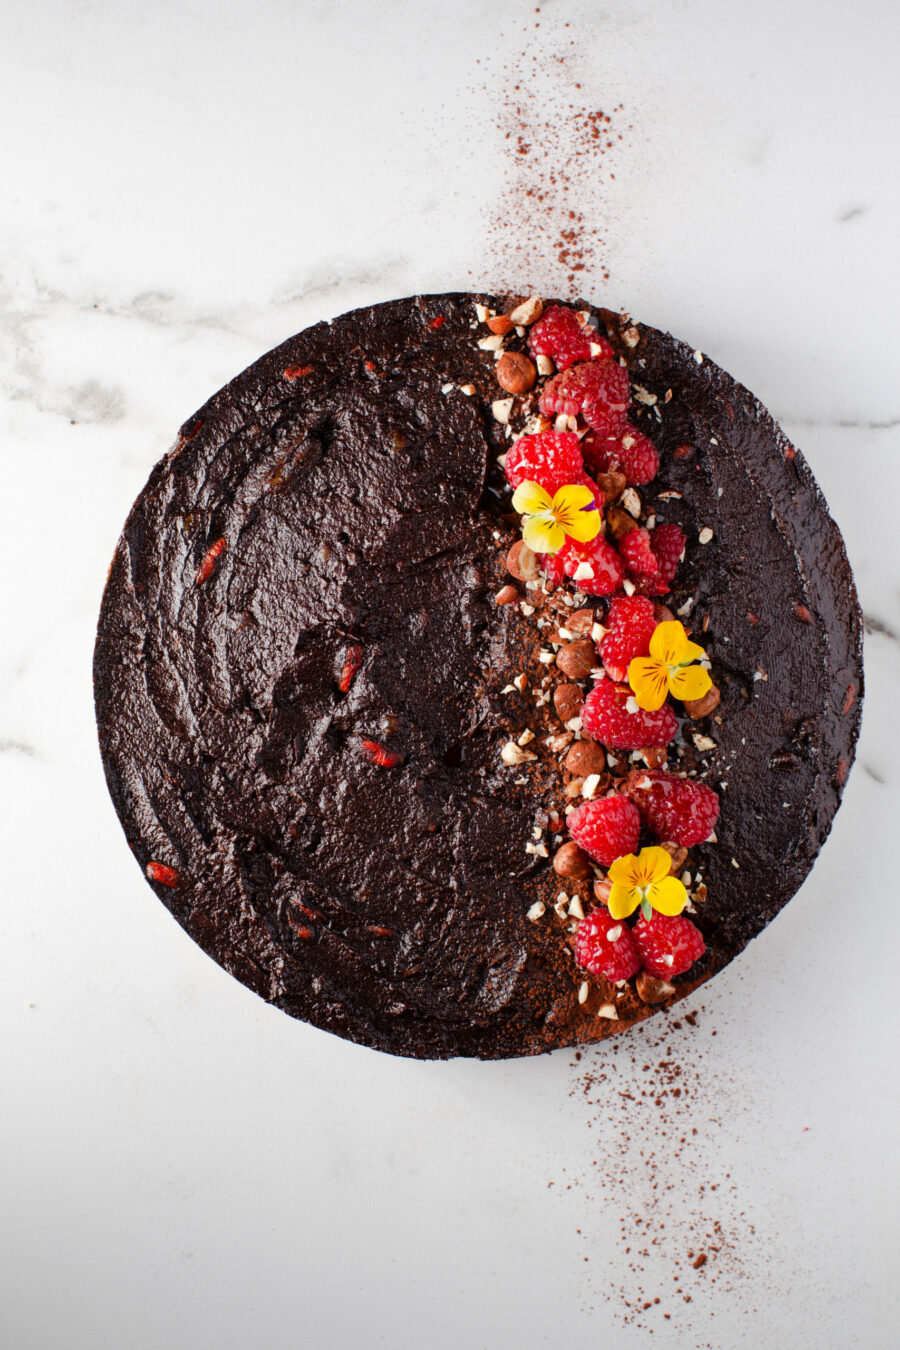 This vegan chocolate cake is the one to make